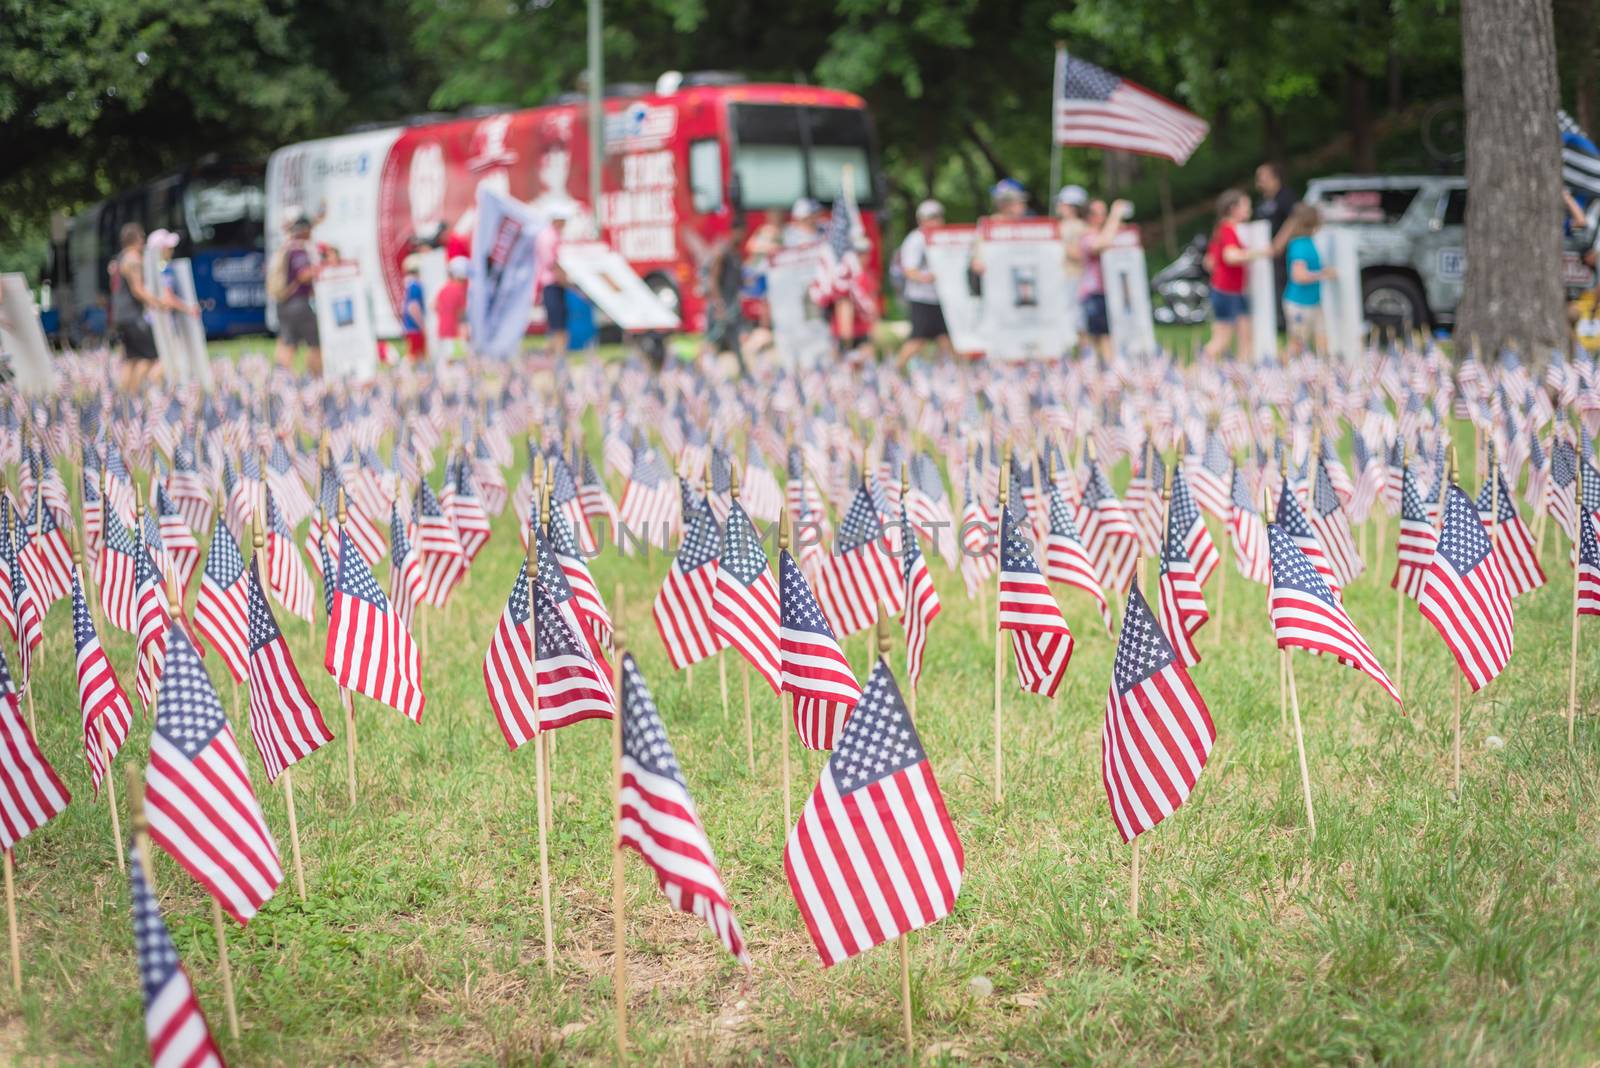 Close-up view of lawn American flag with row of people from Memorial Day March event in Dallas, Texas, USA. Blurry crowded family members carry fallen heroes banners pictures placards in parade